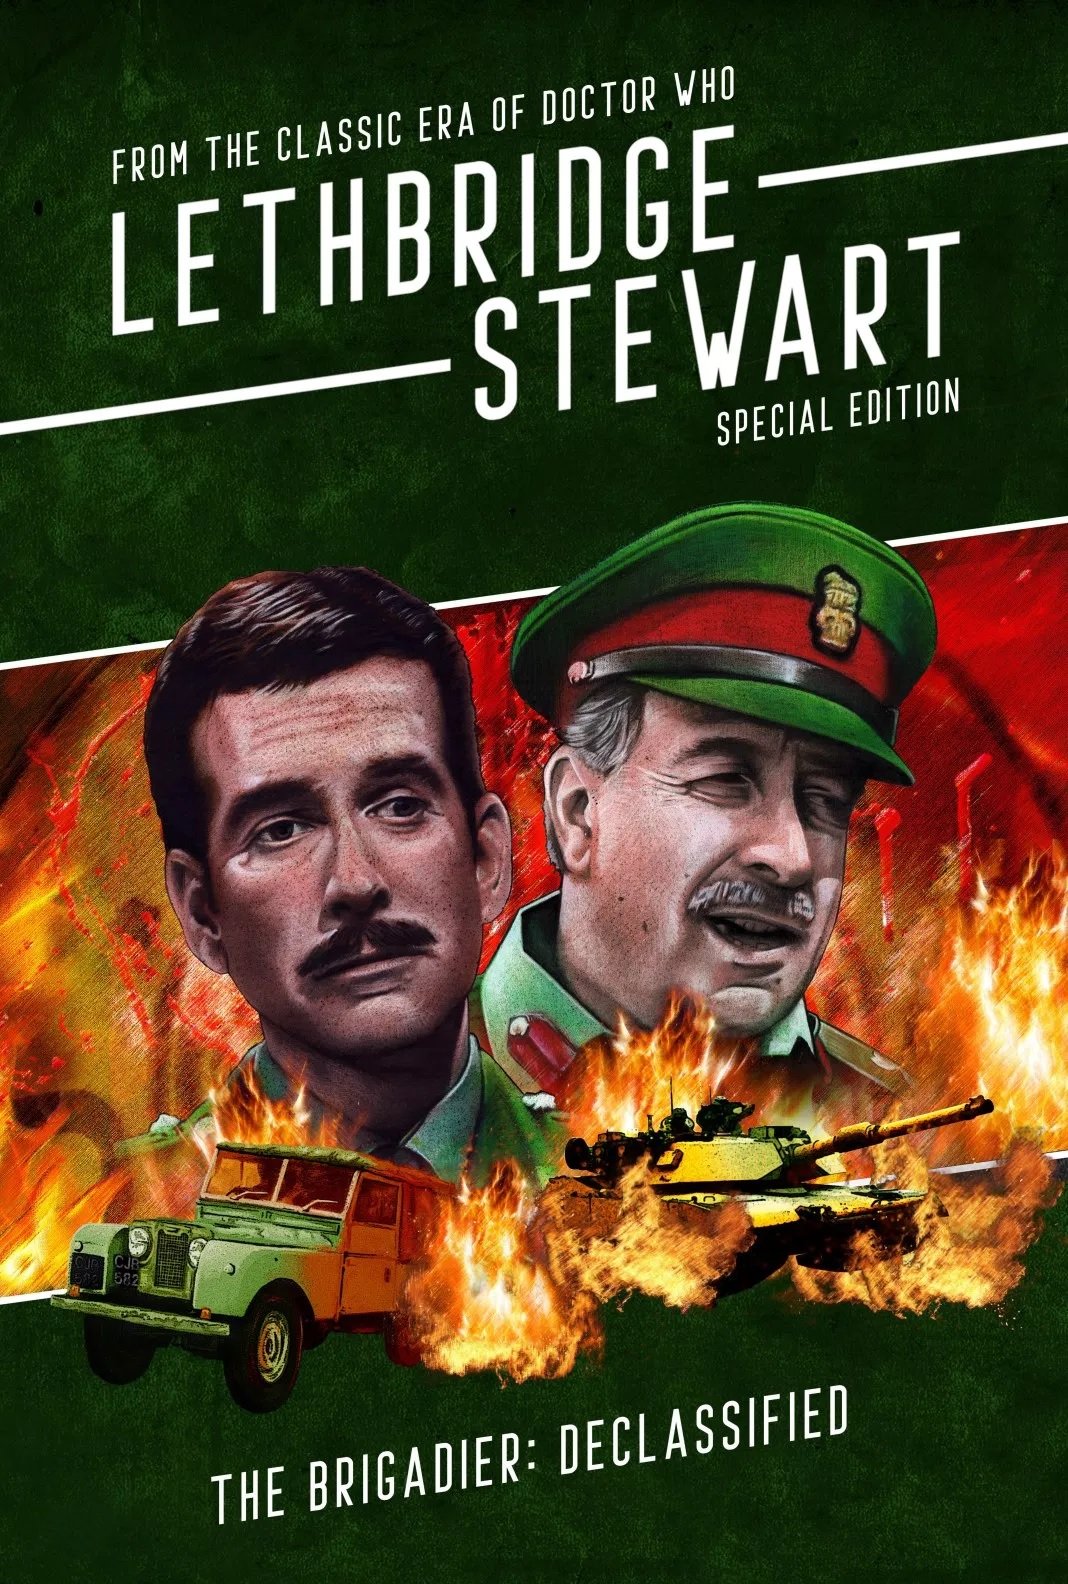 FREE: Download 16 eBooks from Candy Jar, Including Lethbridge-Stewart and Lucy Wilson!